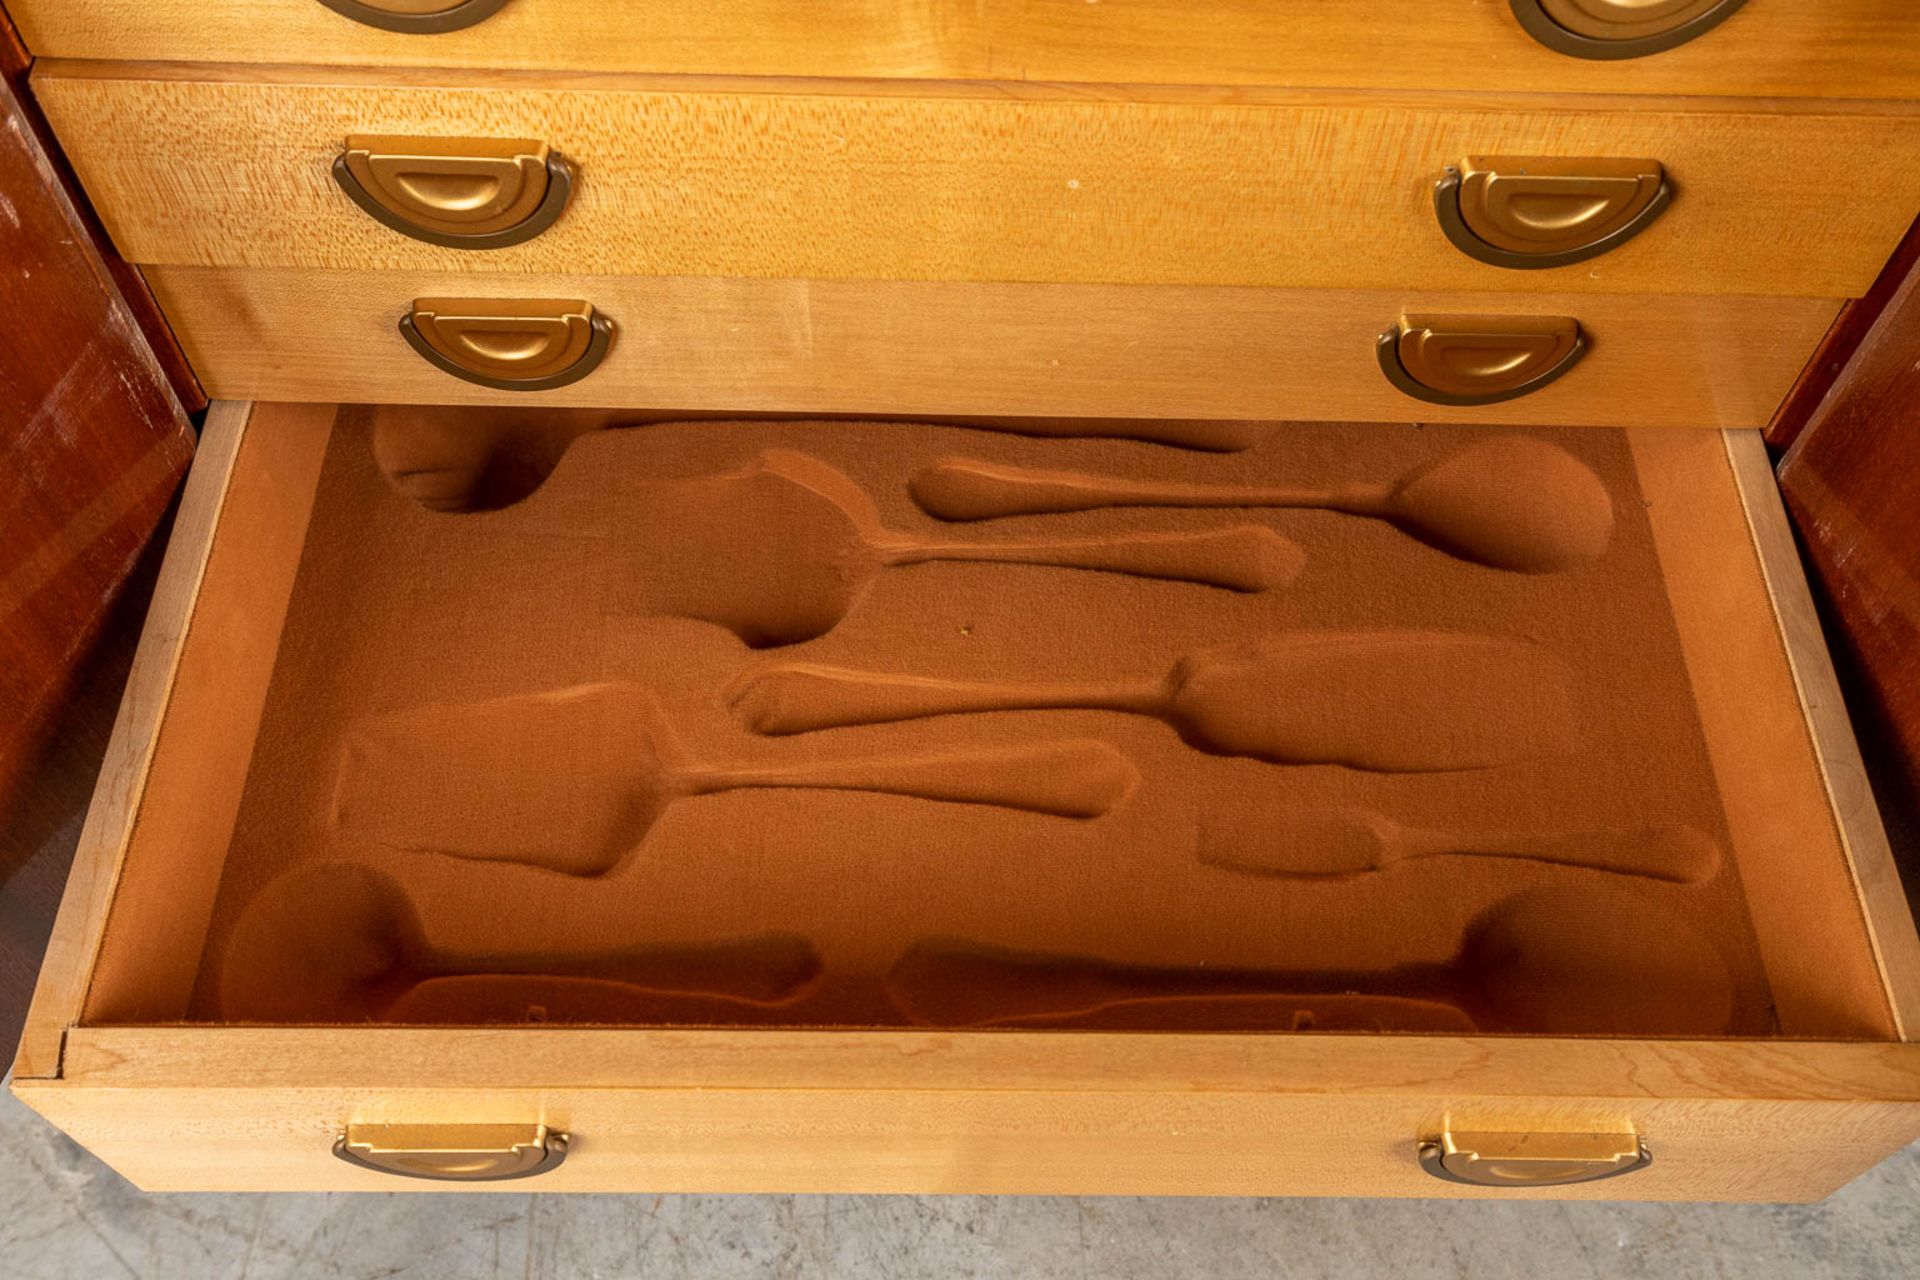 A cutlery case, veneered wood with 4 drawers, Probably made by Decoene. Circa 1950. (D:44 x W:64 x H - Image 12 of 15